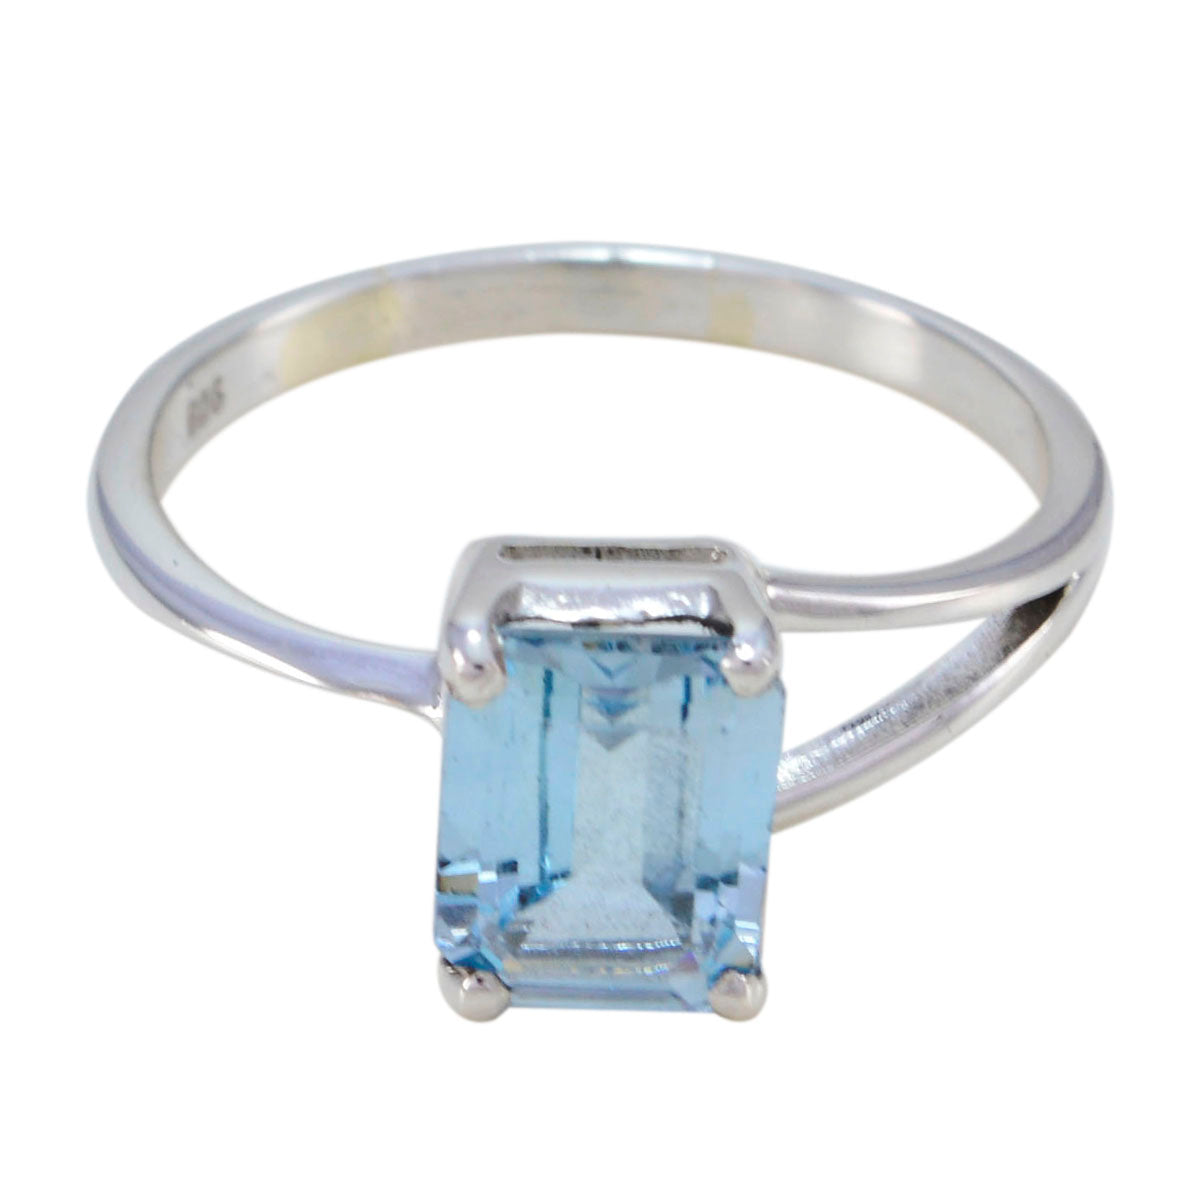 Good Stone Blue Topaz Solid Silver Ring Jewelry Stores In The Mall